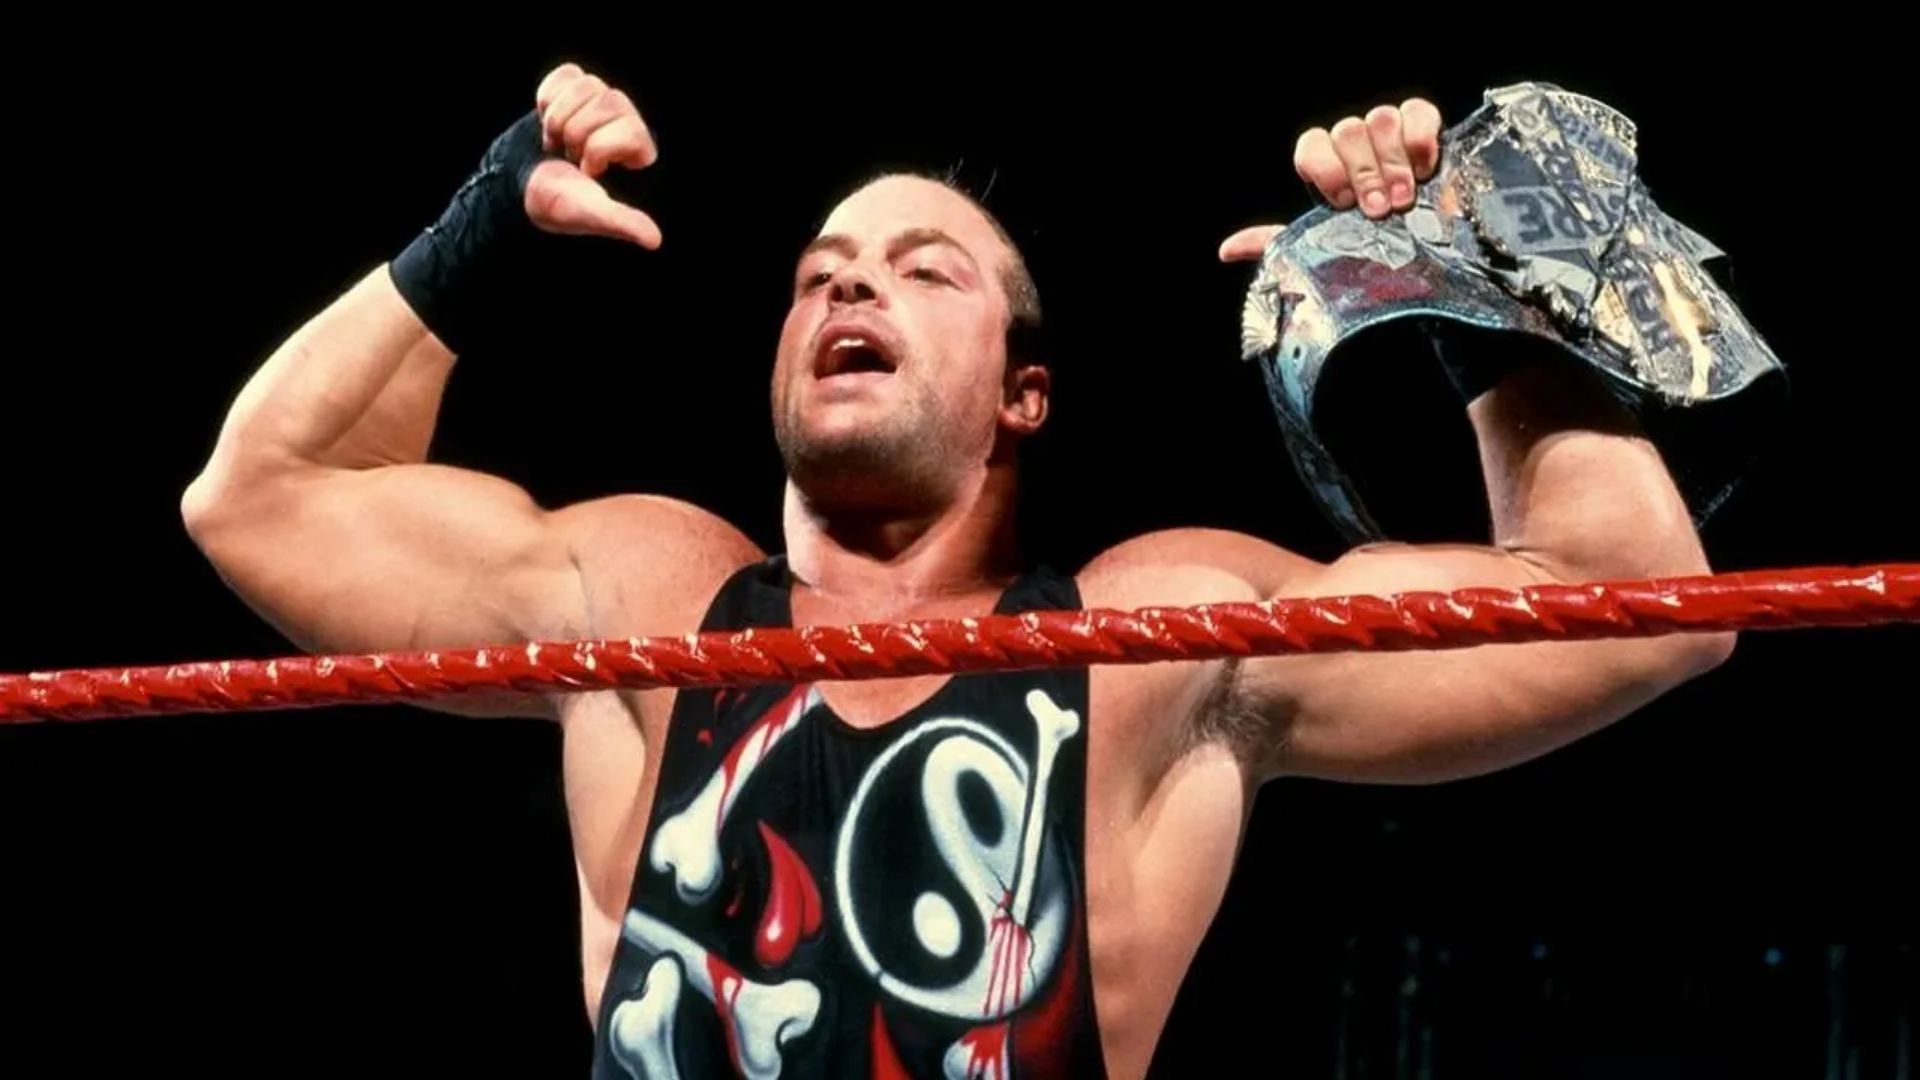 Rob Van Dam had a lot to say about the risks wrestlers take in the industry today.